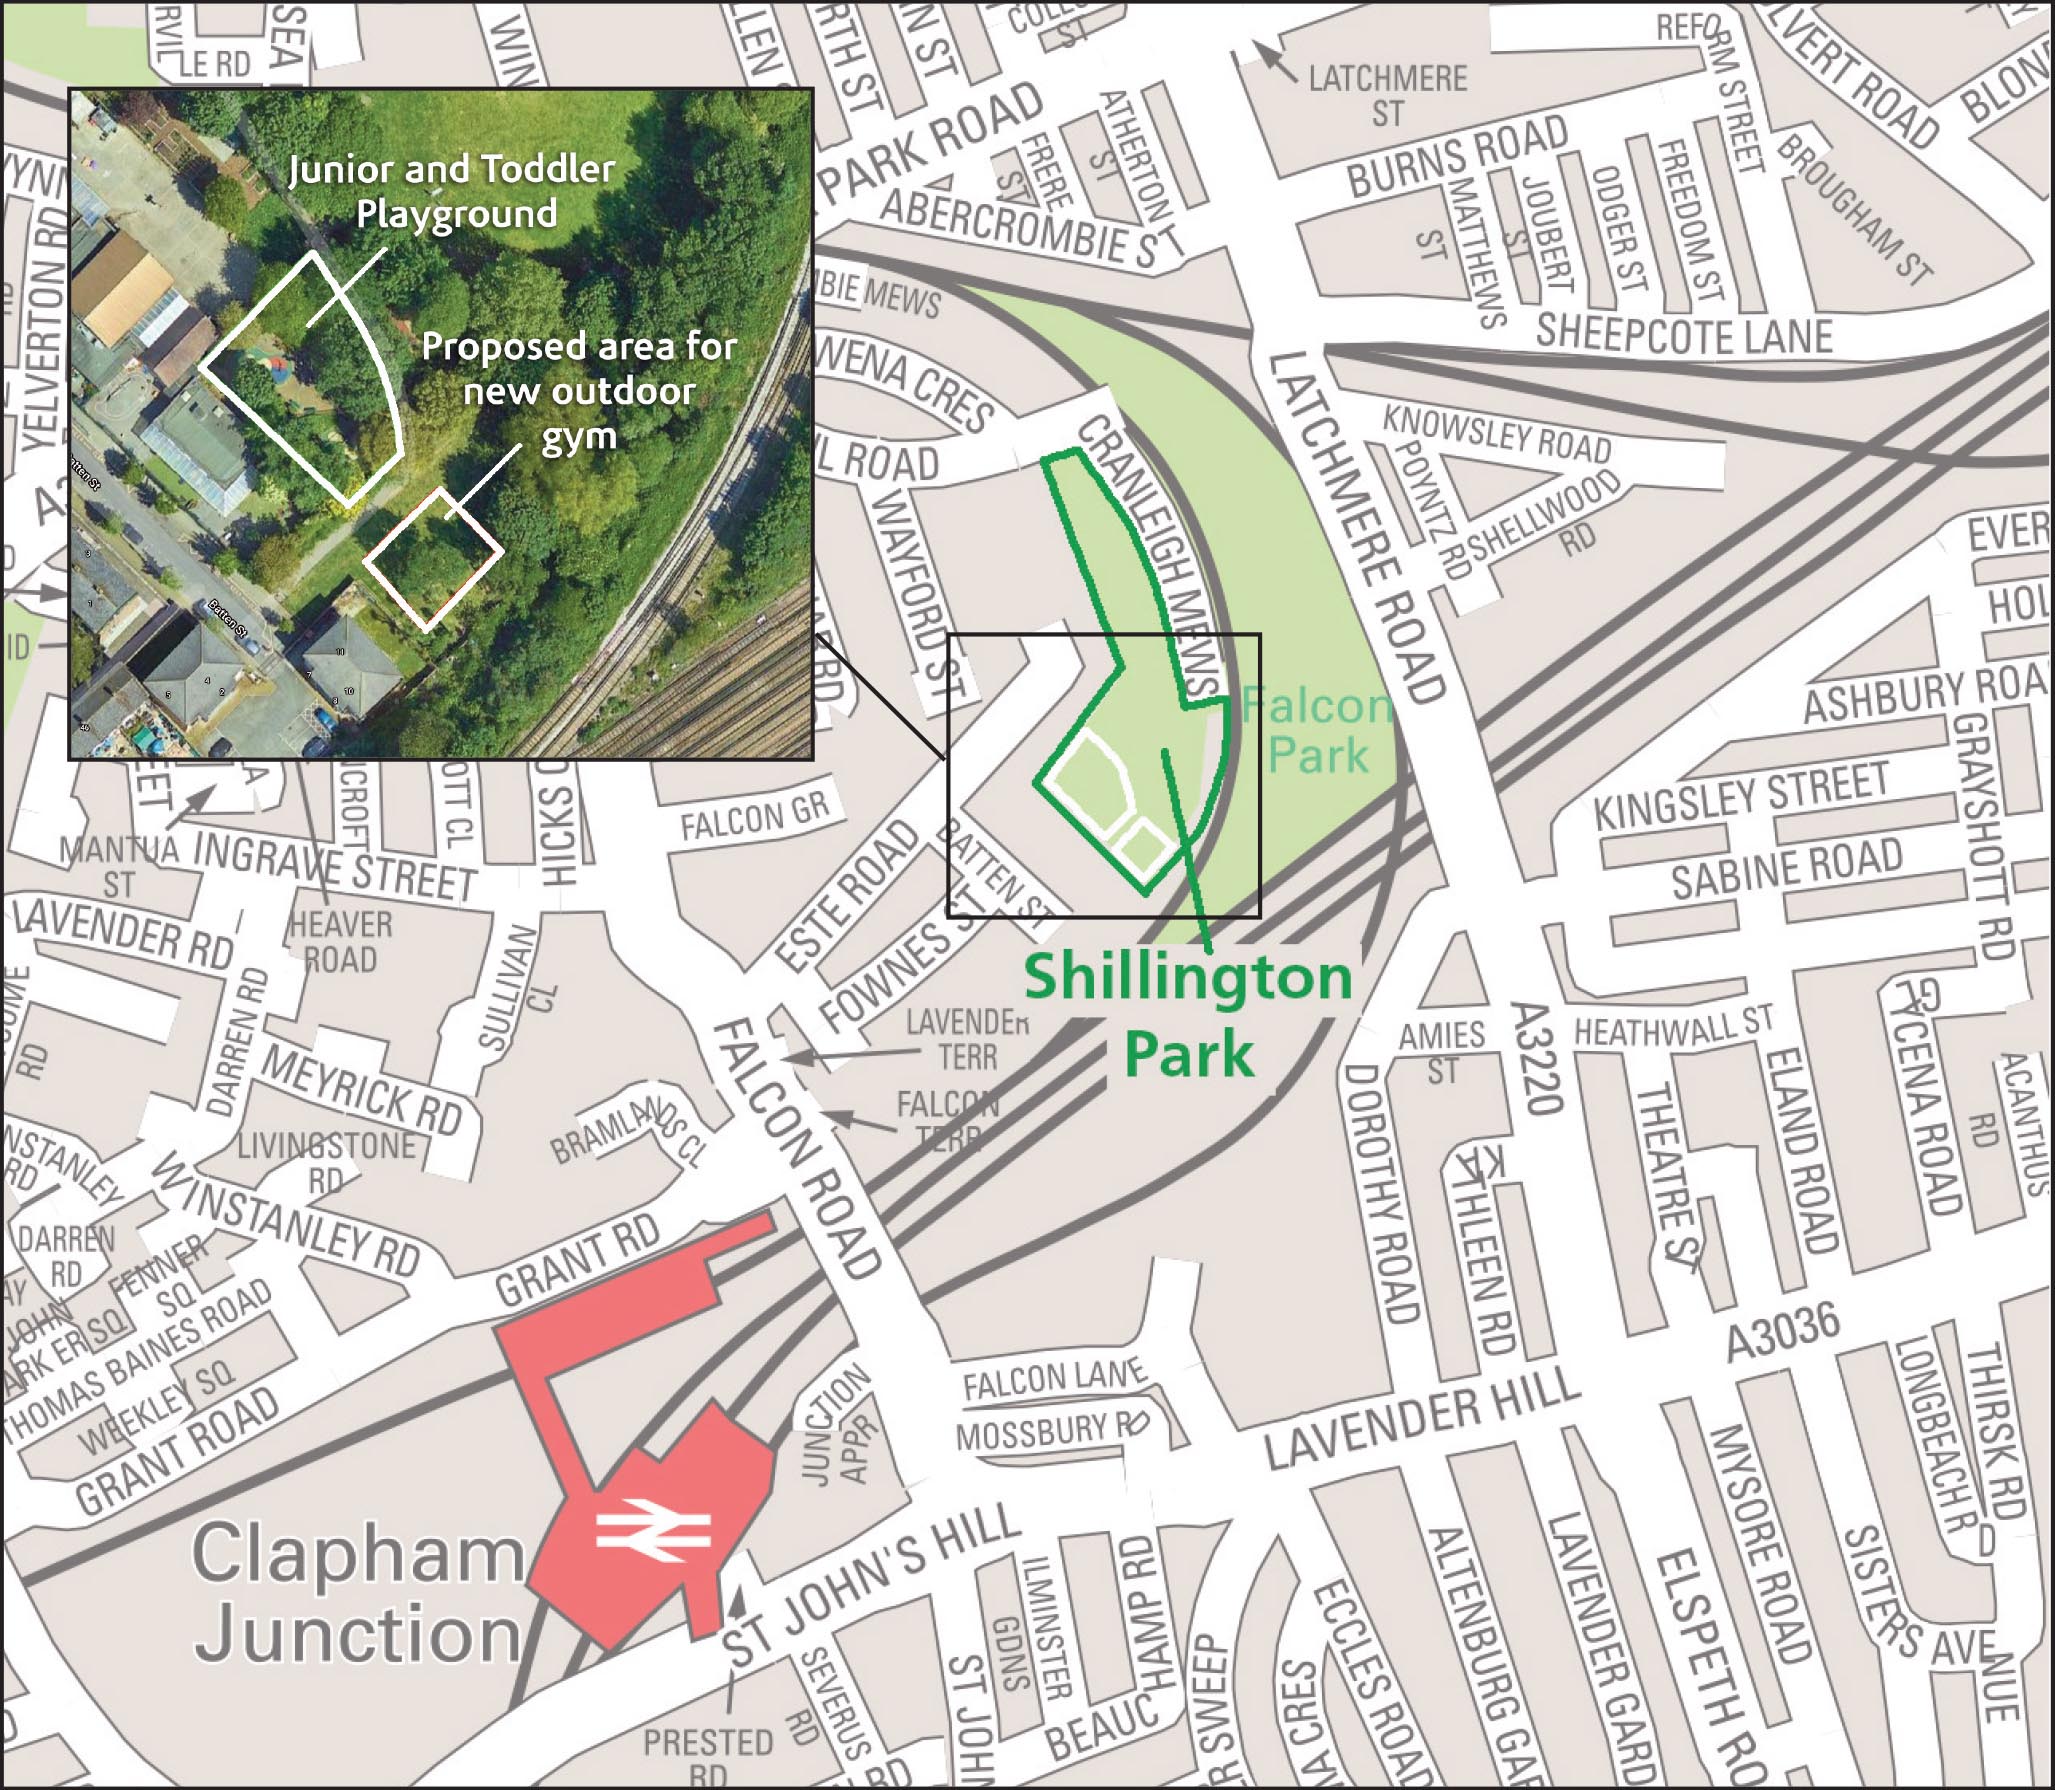 map of Shillington Park showing junior and toddler playground and proposed area for outdoor gym from aerial view